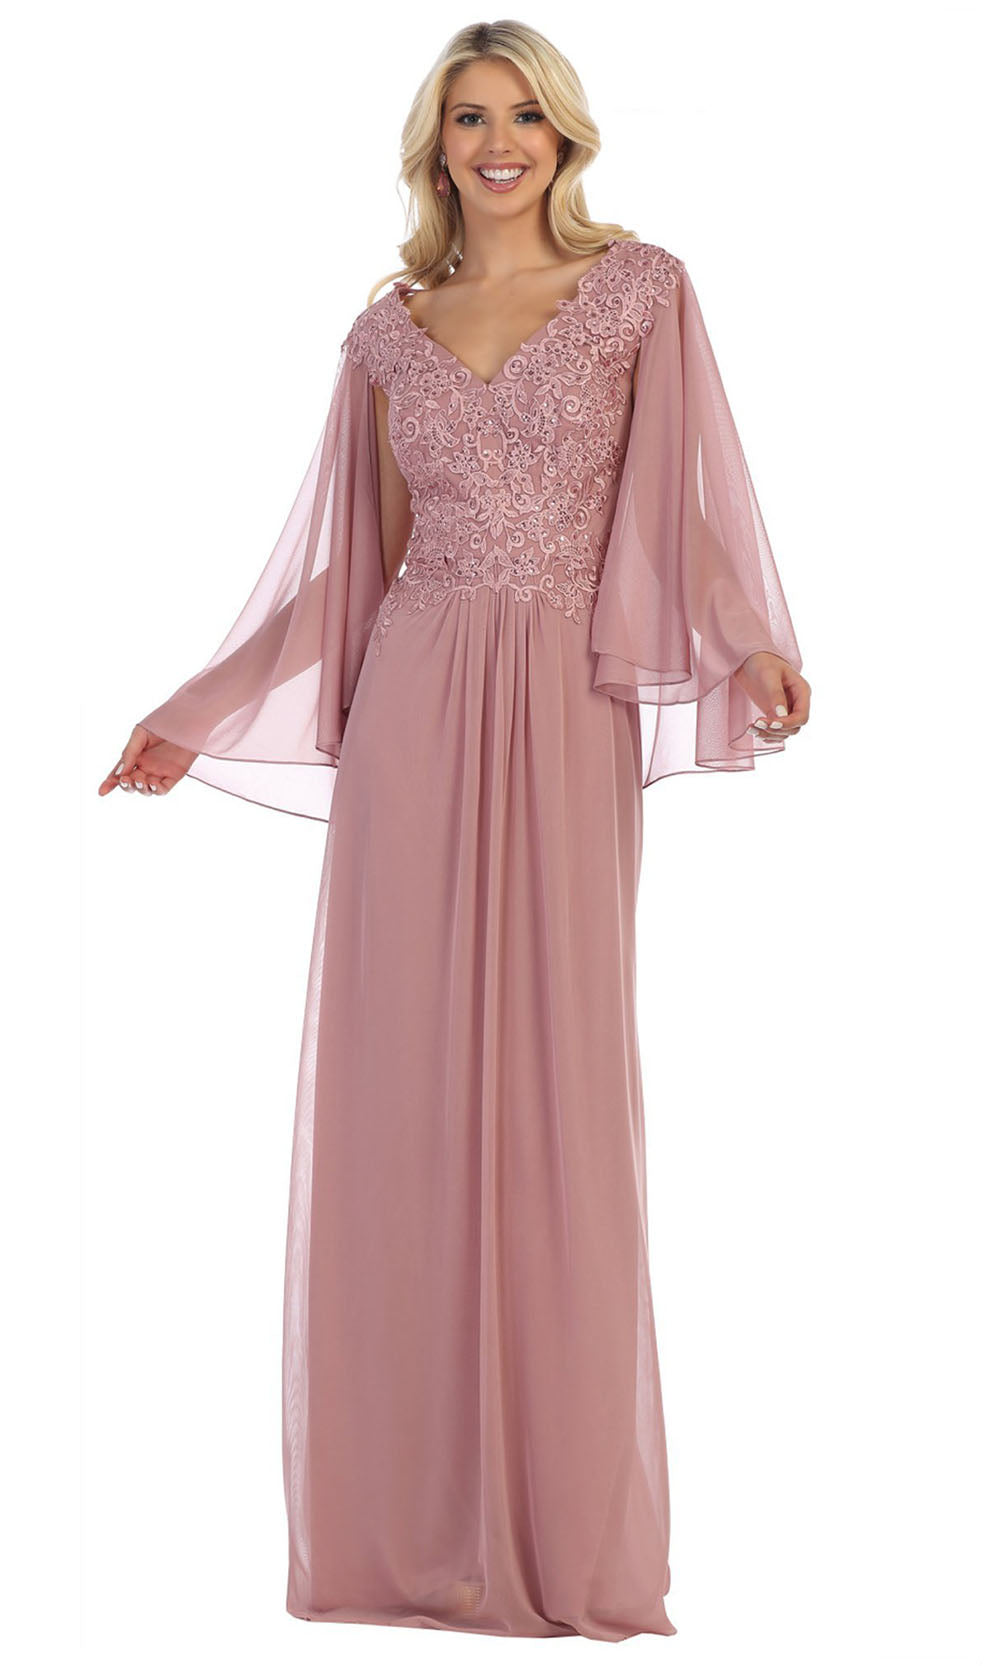 May Queen - MQ1612B V Neck Formal Gown In Pink